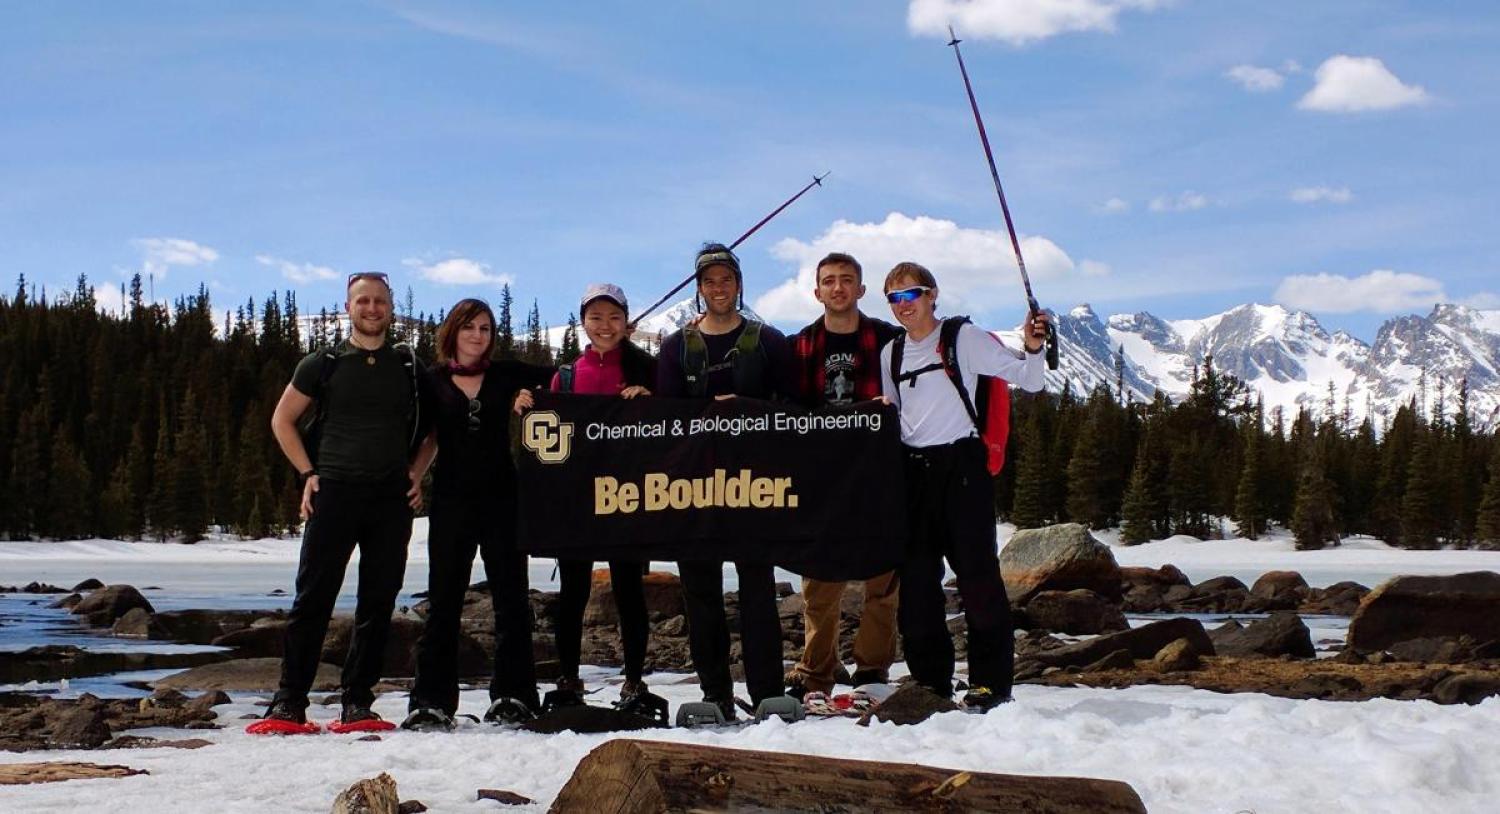 AIChE chapter members on a hiking trip with a CU Boulder banner